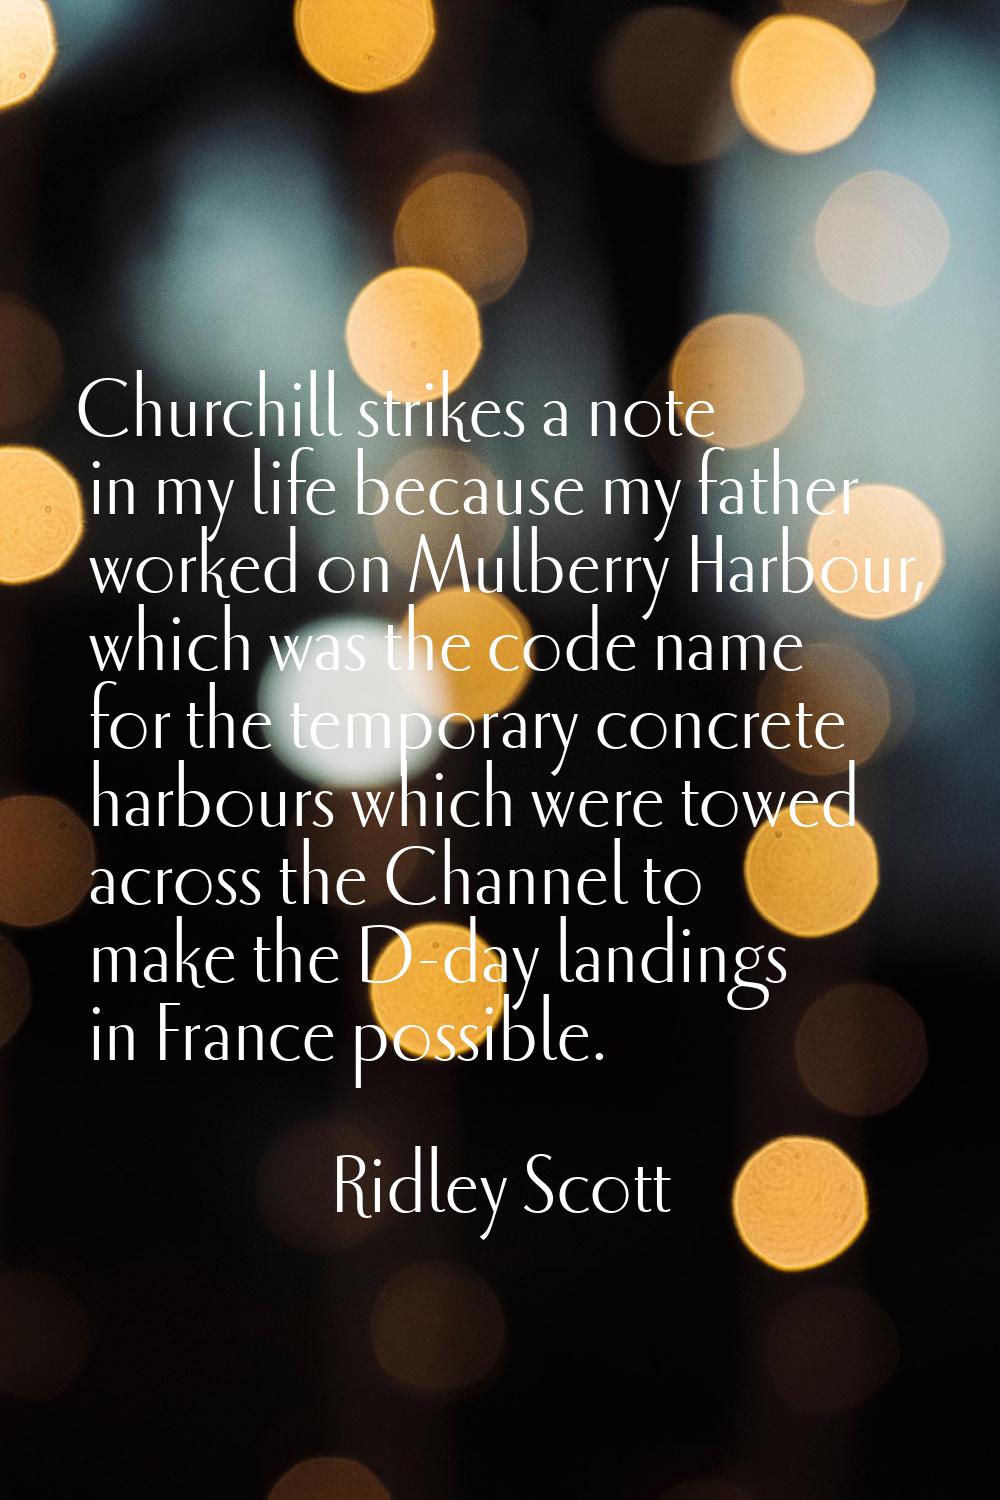 Churchill strikes a note in my life because my father worked on Mulberry Harbour, which was the cod